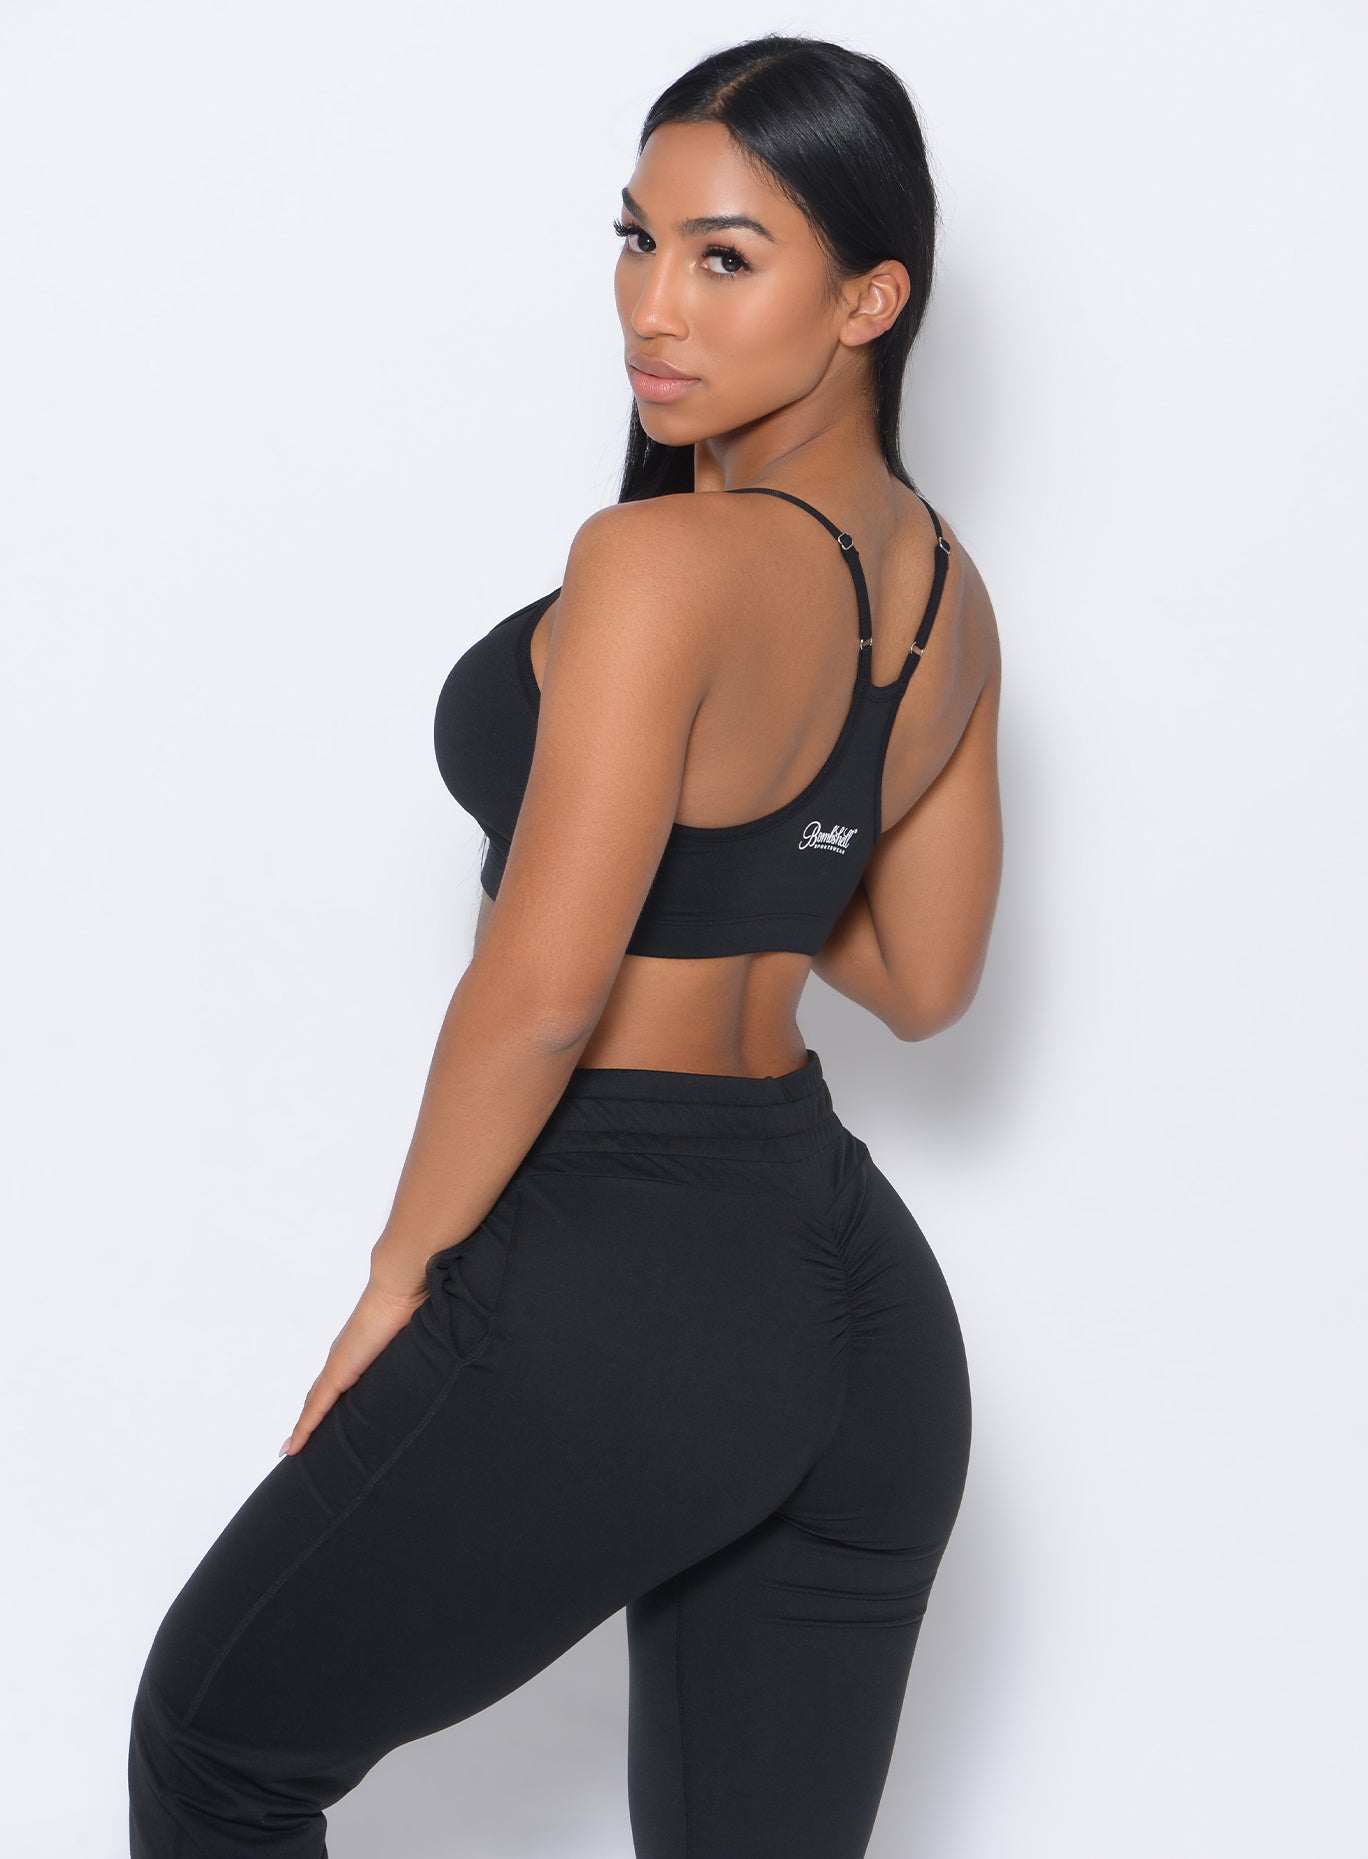 Left side view of the model  facing to her left wearing our Relax Sports Bra and a matching joggers